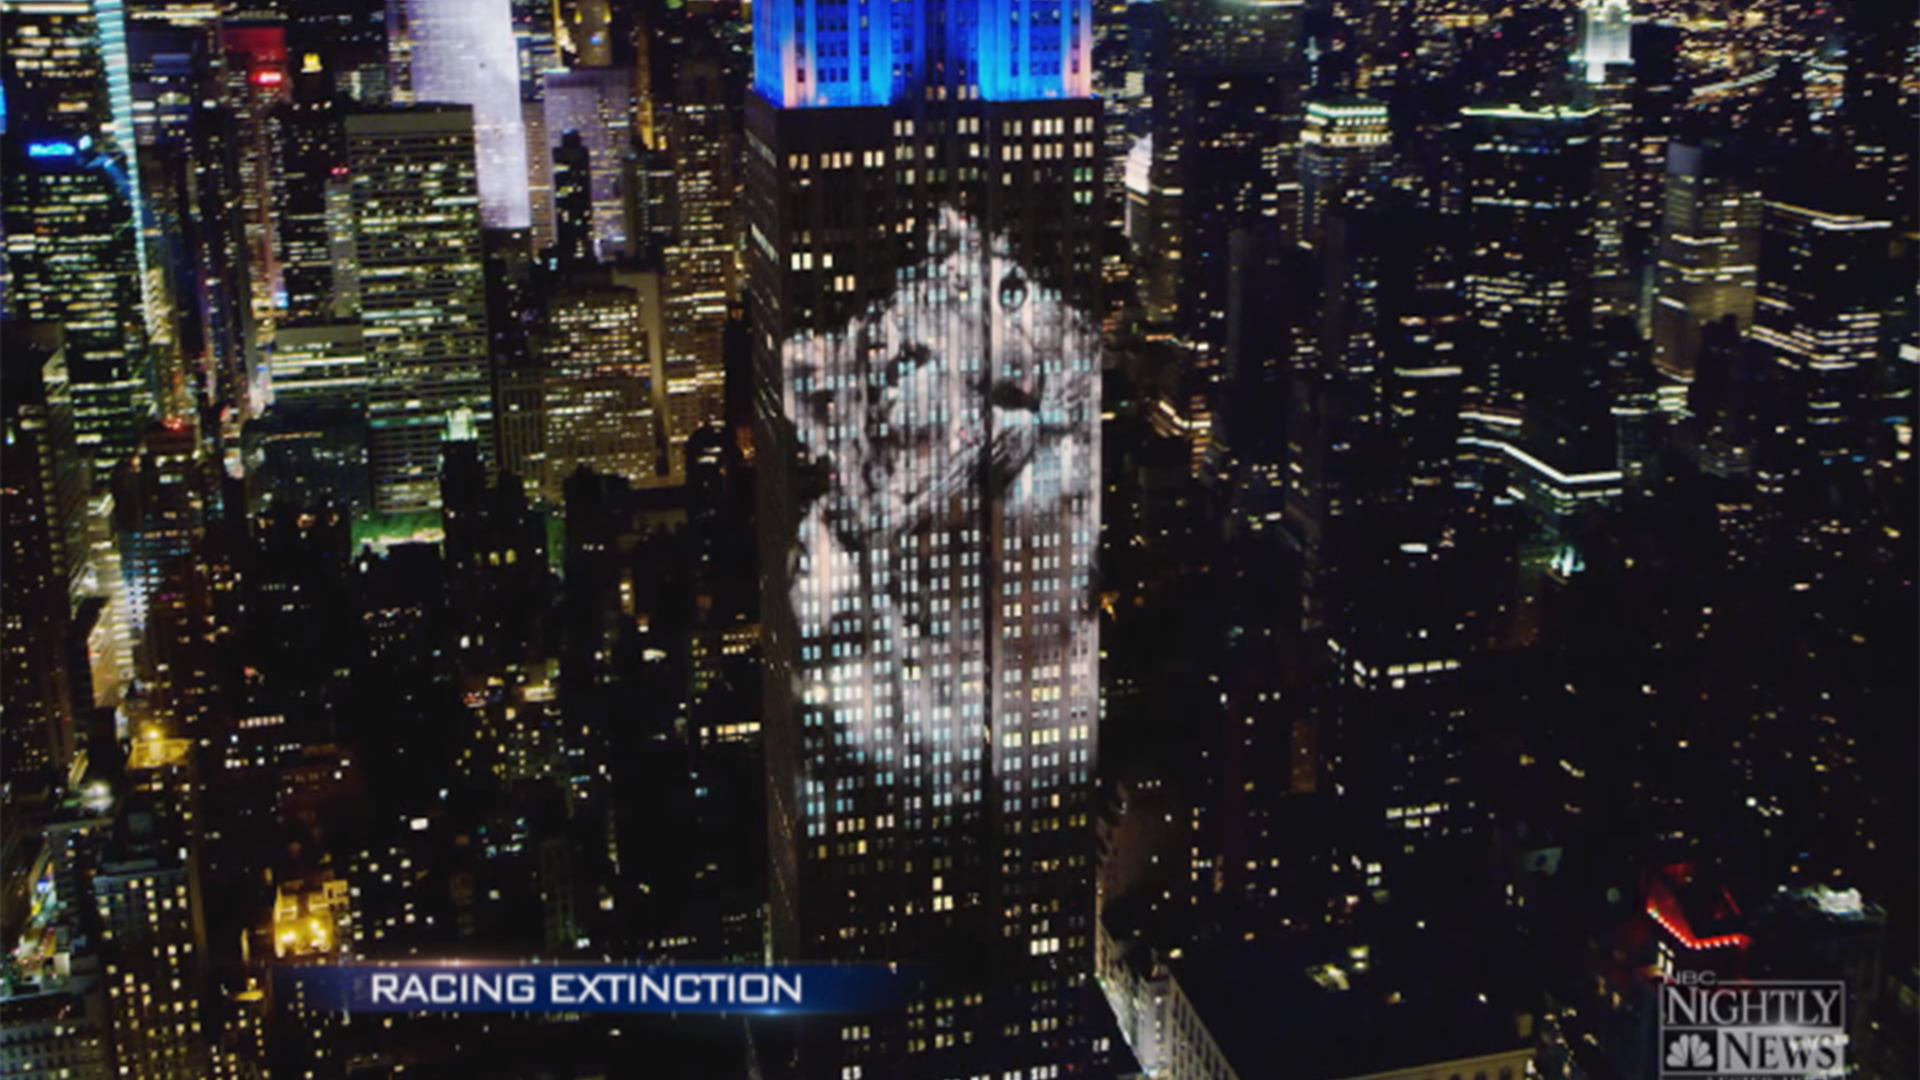 Racing Extinction Image Of Dying Species Projected Onto Empire